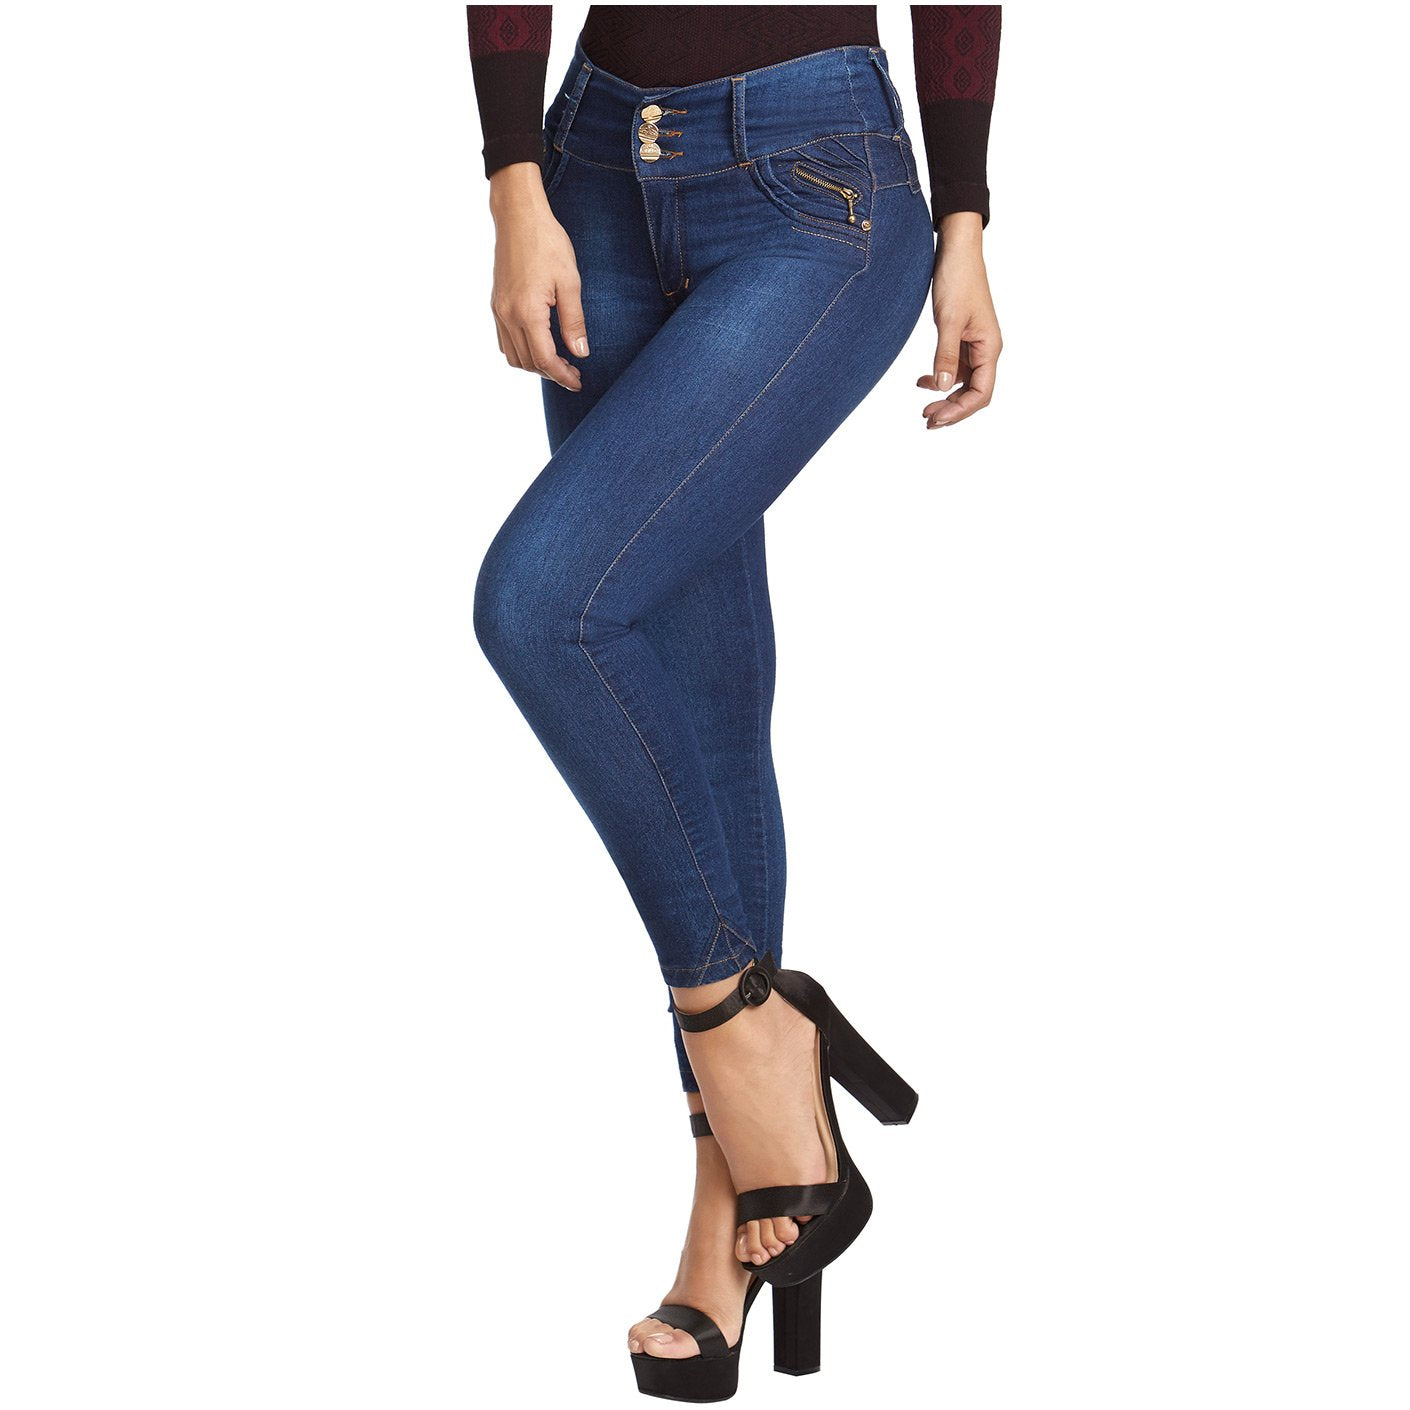 LT.Rose Jeans: IS3004 - Butt Lifting Skinny Jeans - Showmee Store